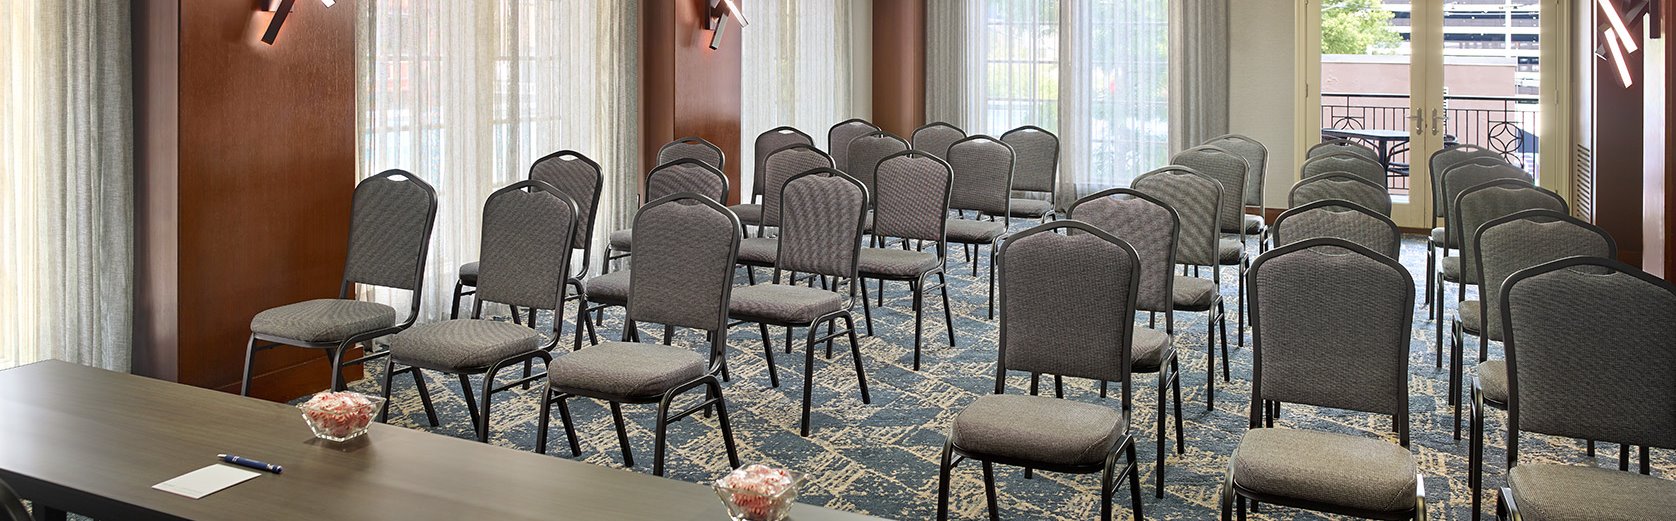 Choose Our Hotel for Your Meeting in Atlanta